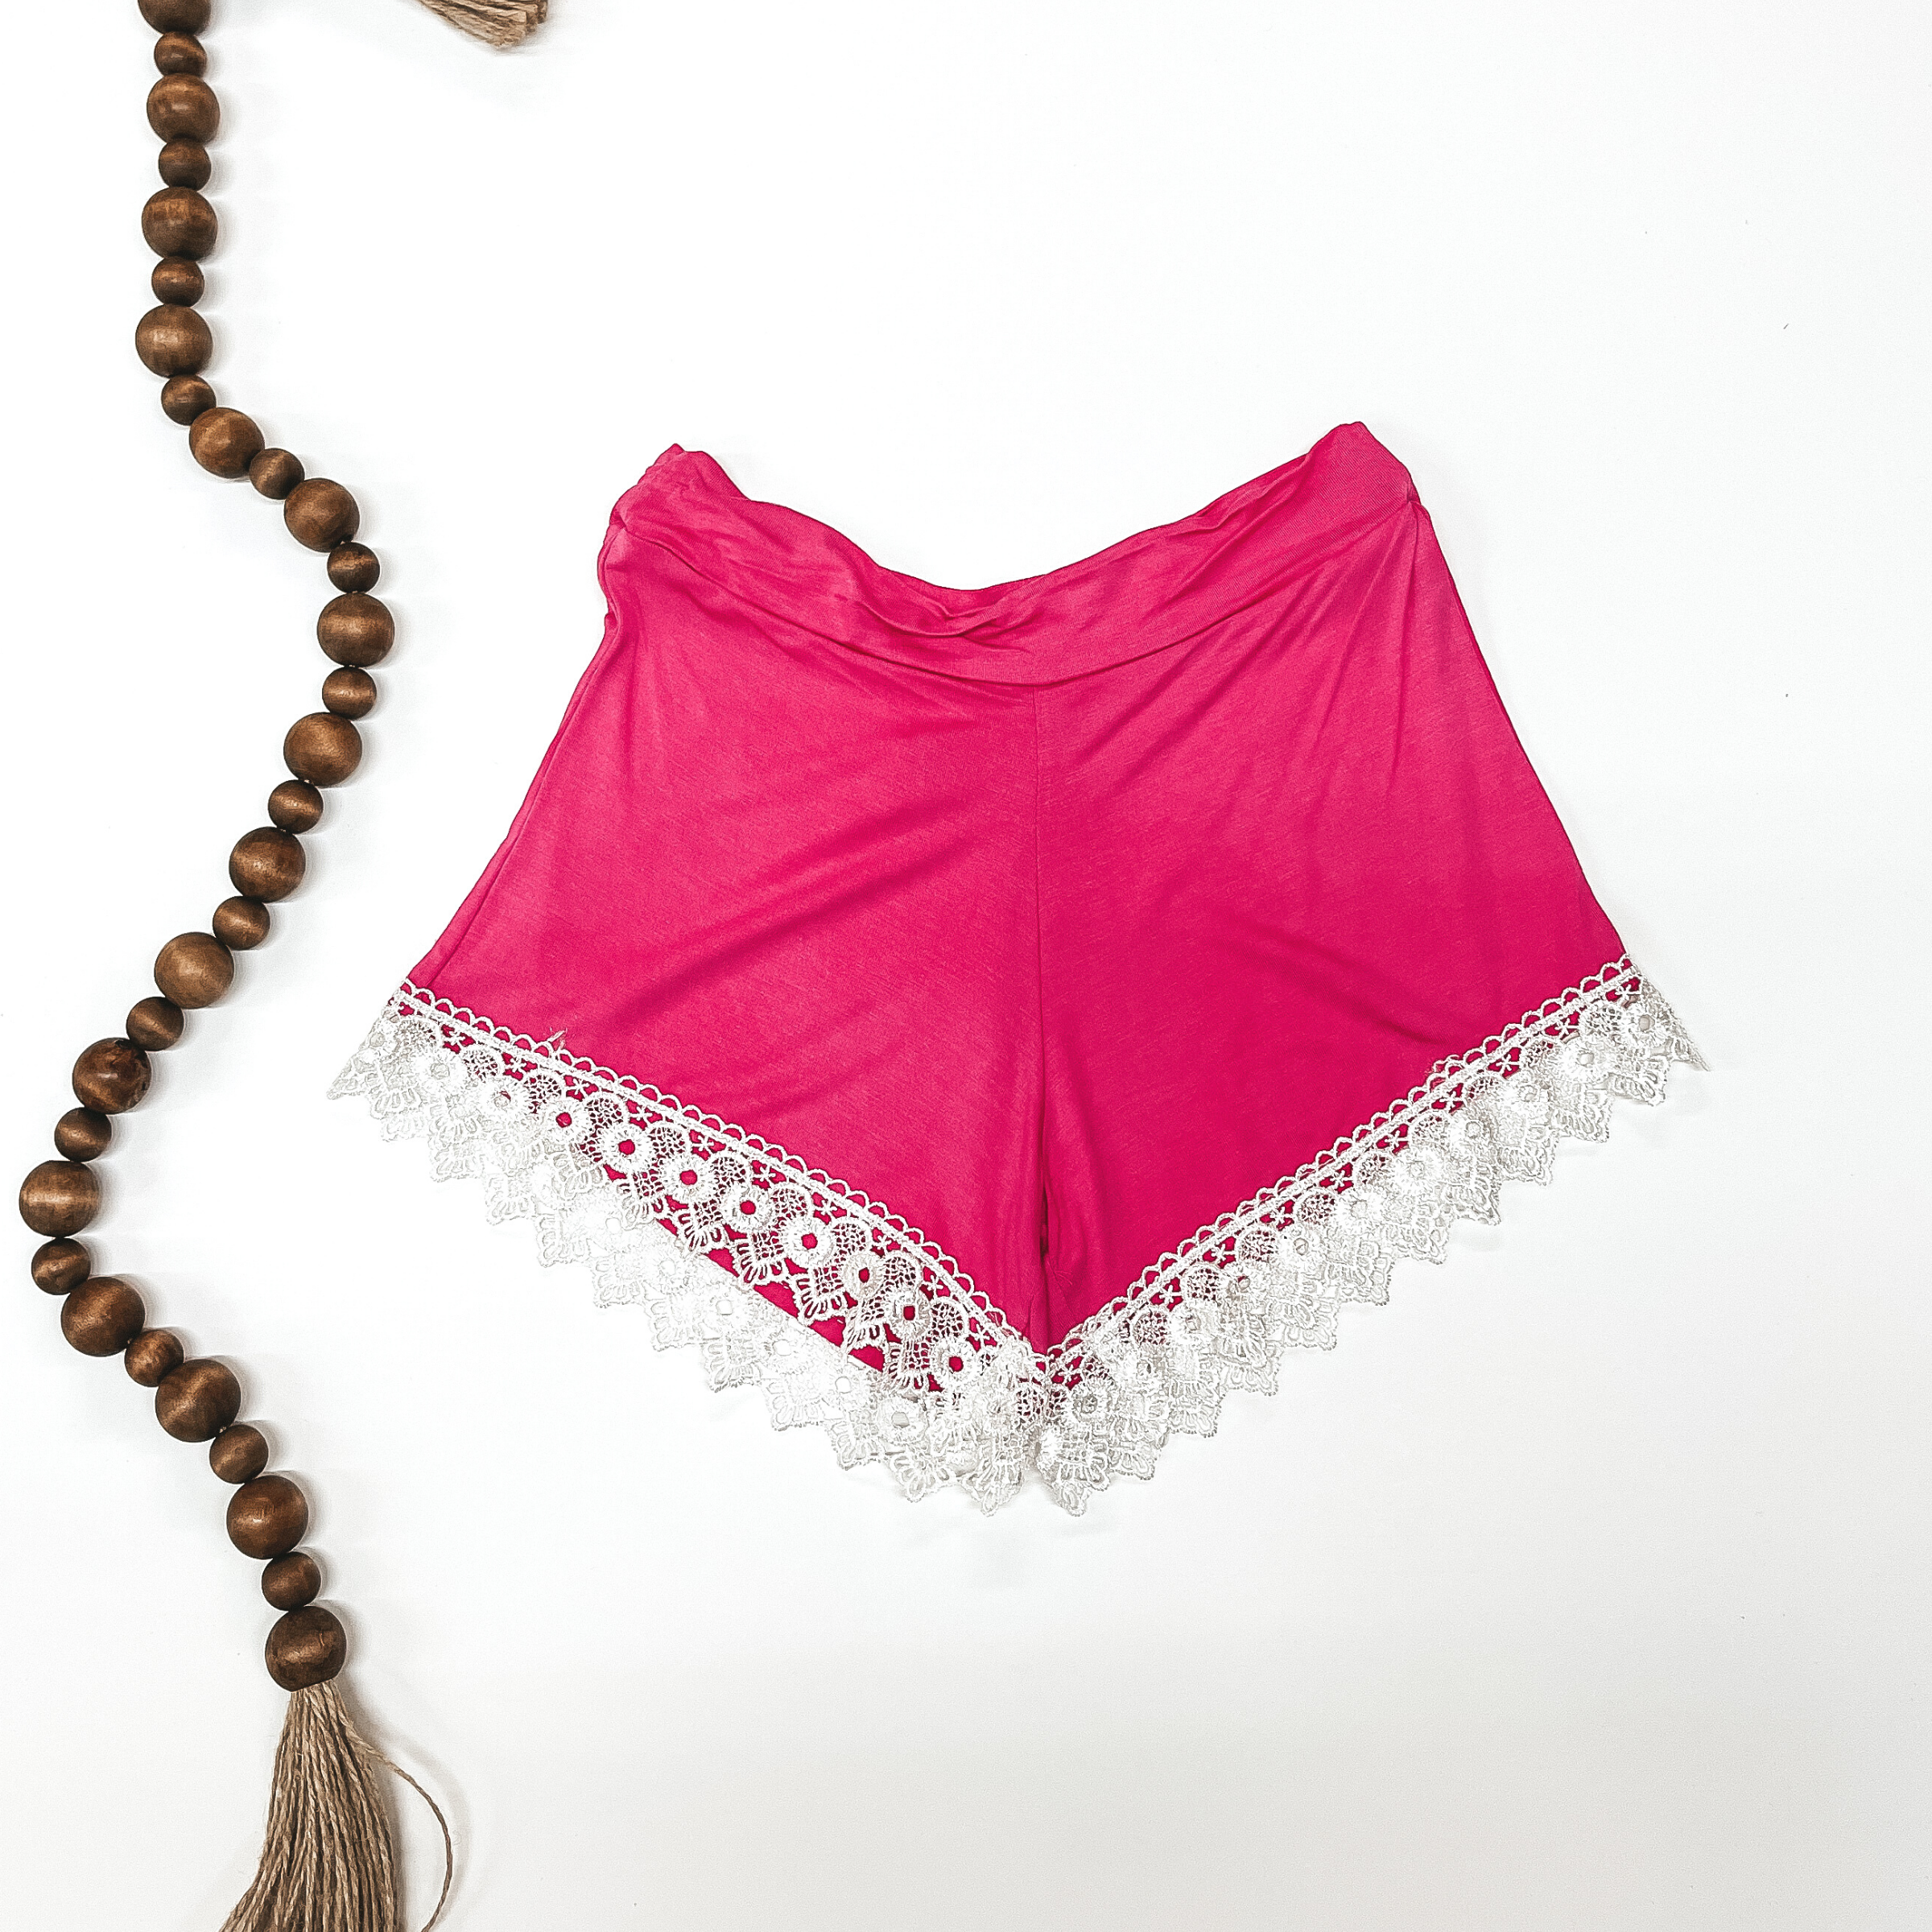 Fuchsia Shorts with Lace Trim - Giddy Up Glamour Boutique